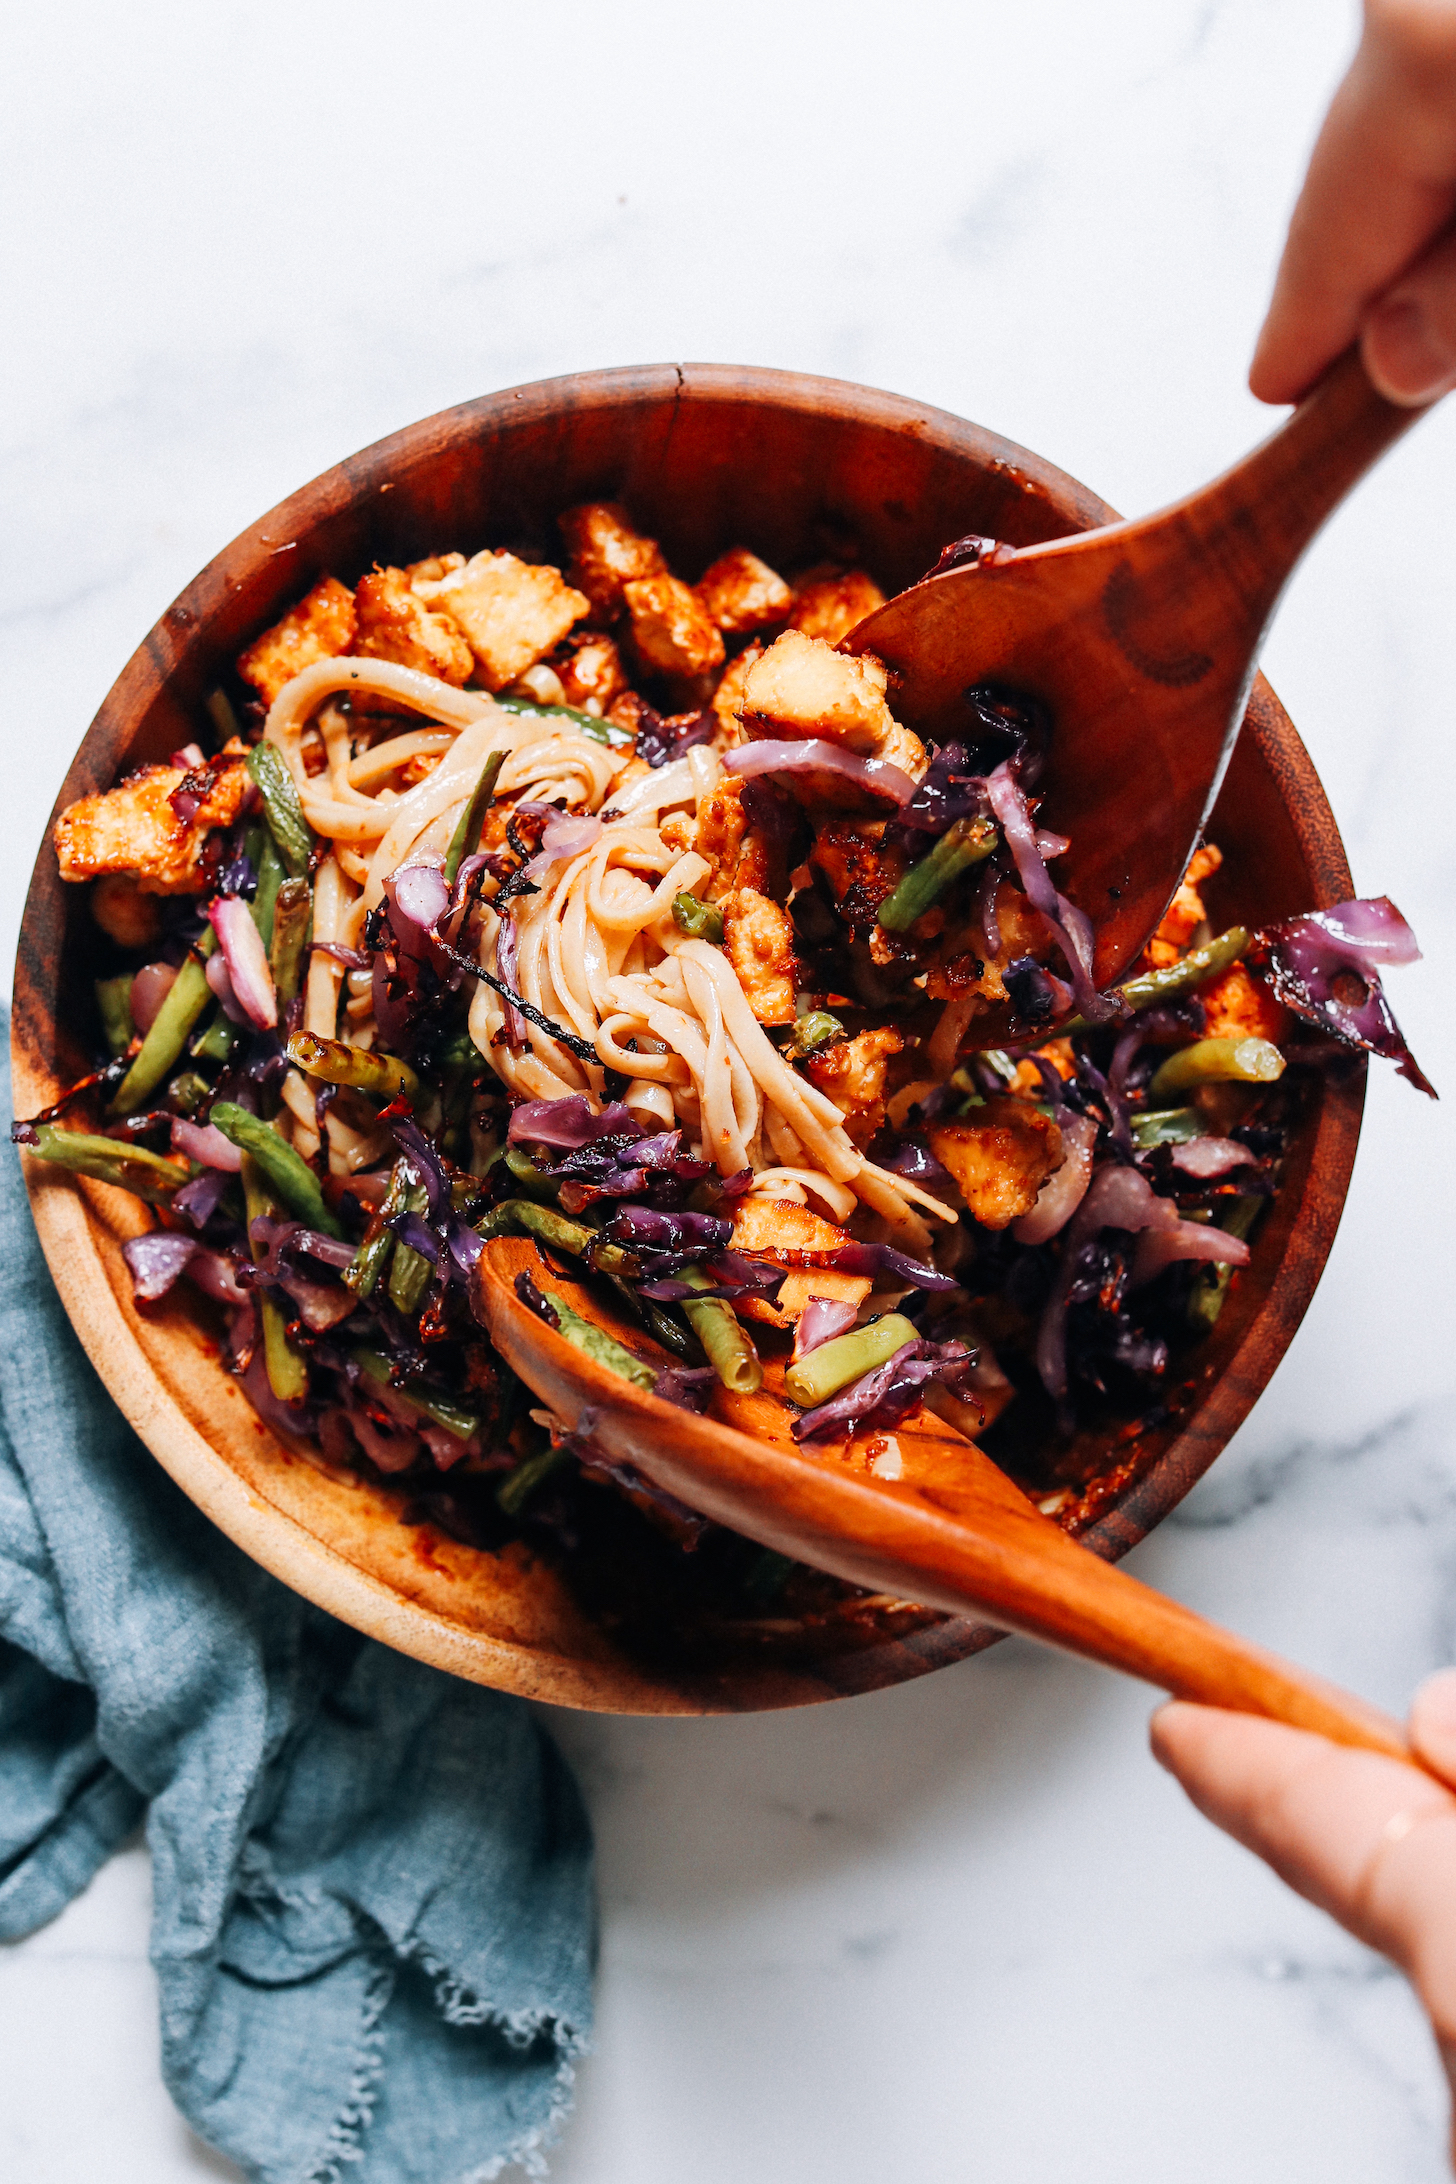 Using wooden salad spoons to toss ginger sesame noodles with baked crispy tofu and veggies